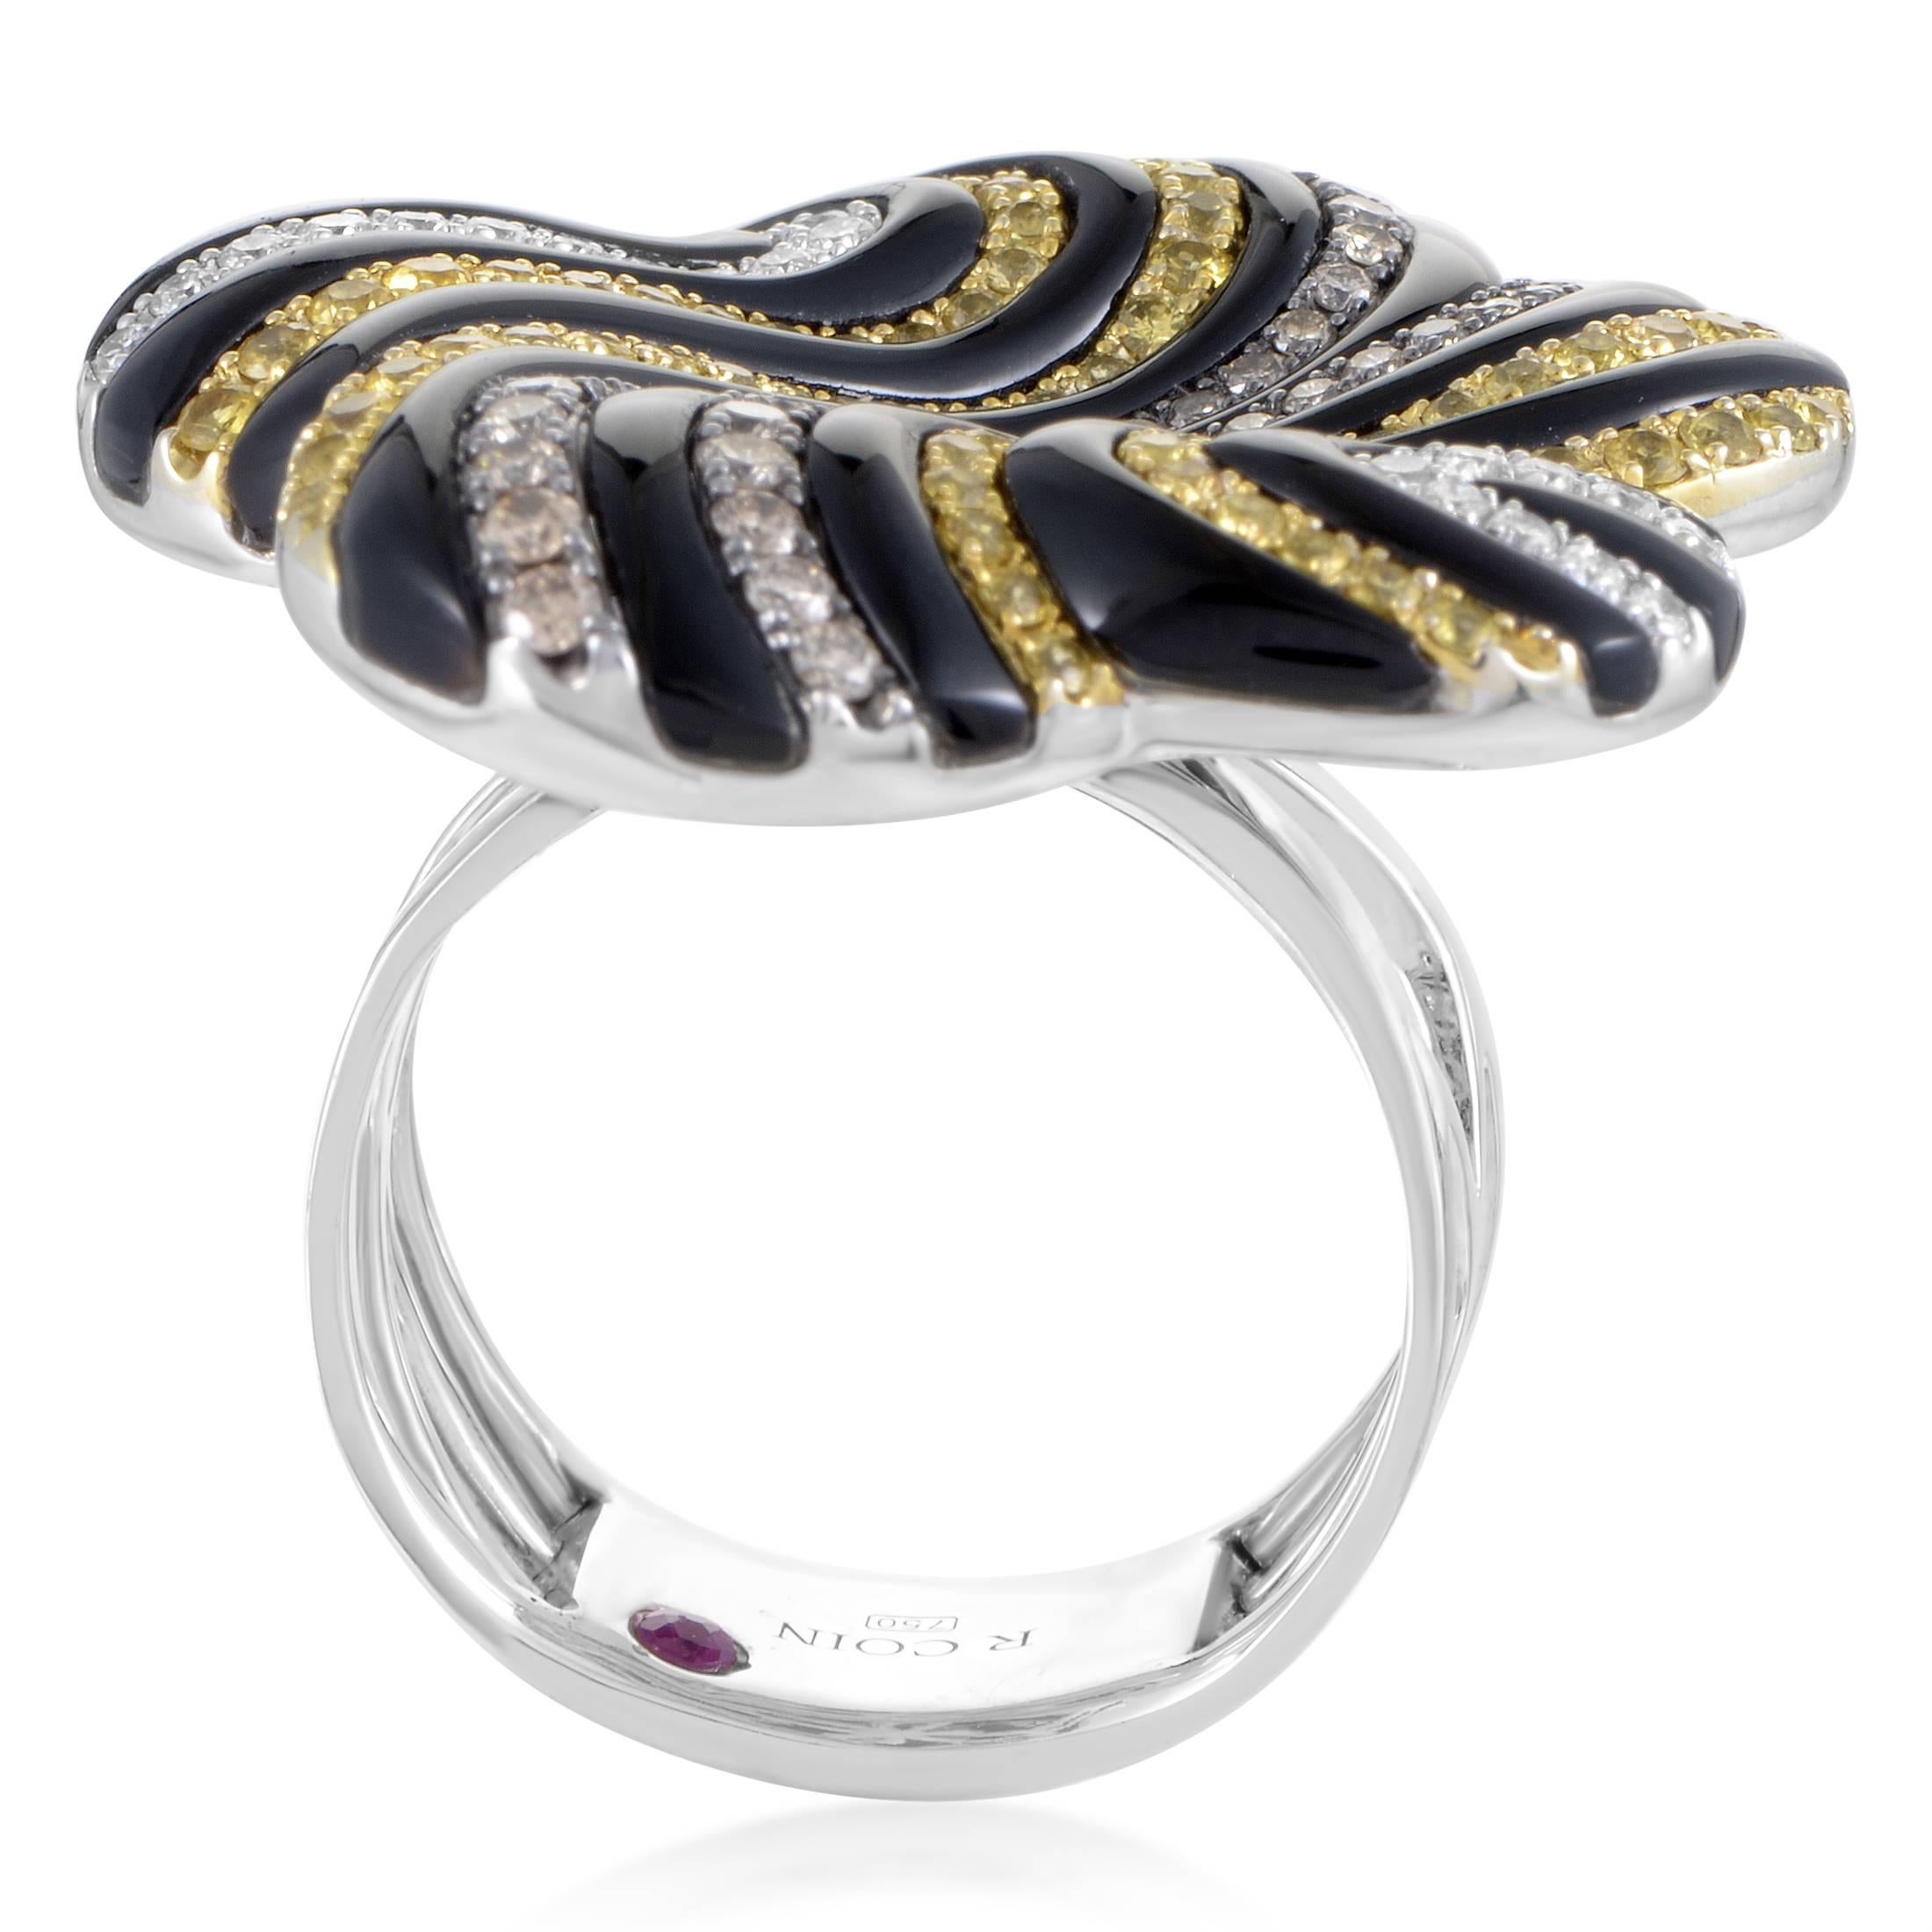 A truly amazing sight produced by a hypnotic arrangement of gems against a contrasting black background, this majestic 18K white gold ring from Roberto Coin boasts glistening white diamonds, nifty brown diamonds and exuberant yellow sapphires for a